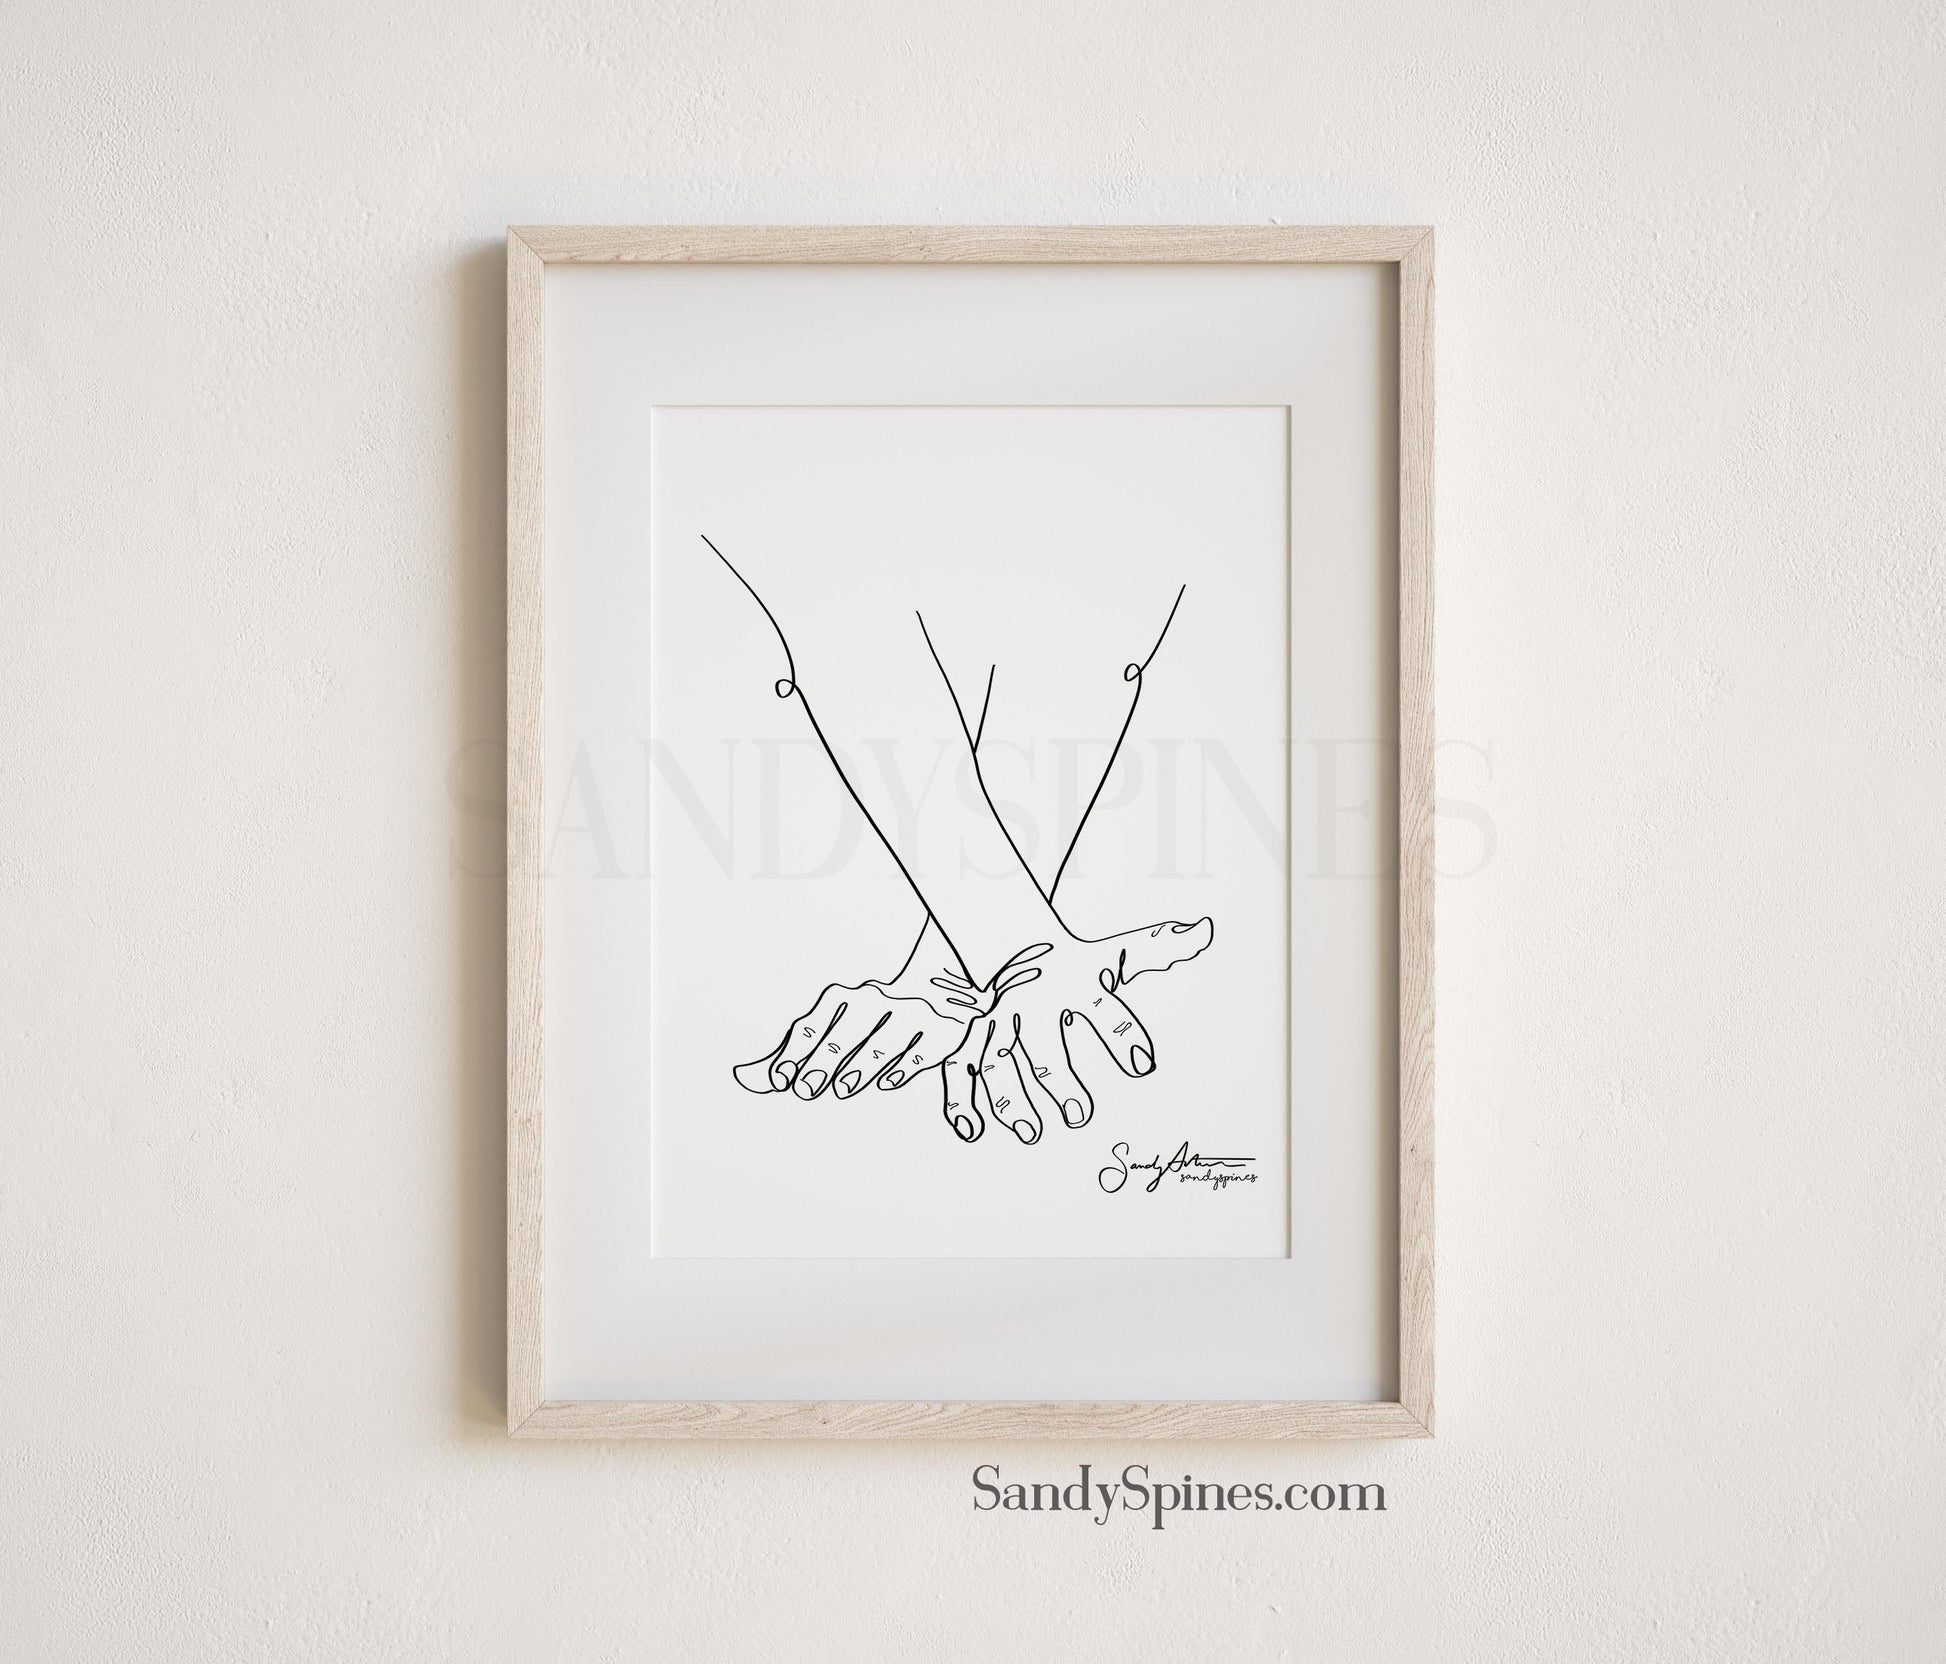 Original Sketch Artwork by Dr. Sandy Arthur; The image depicts 2 hands crossed and applying pressure during a therapy session